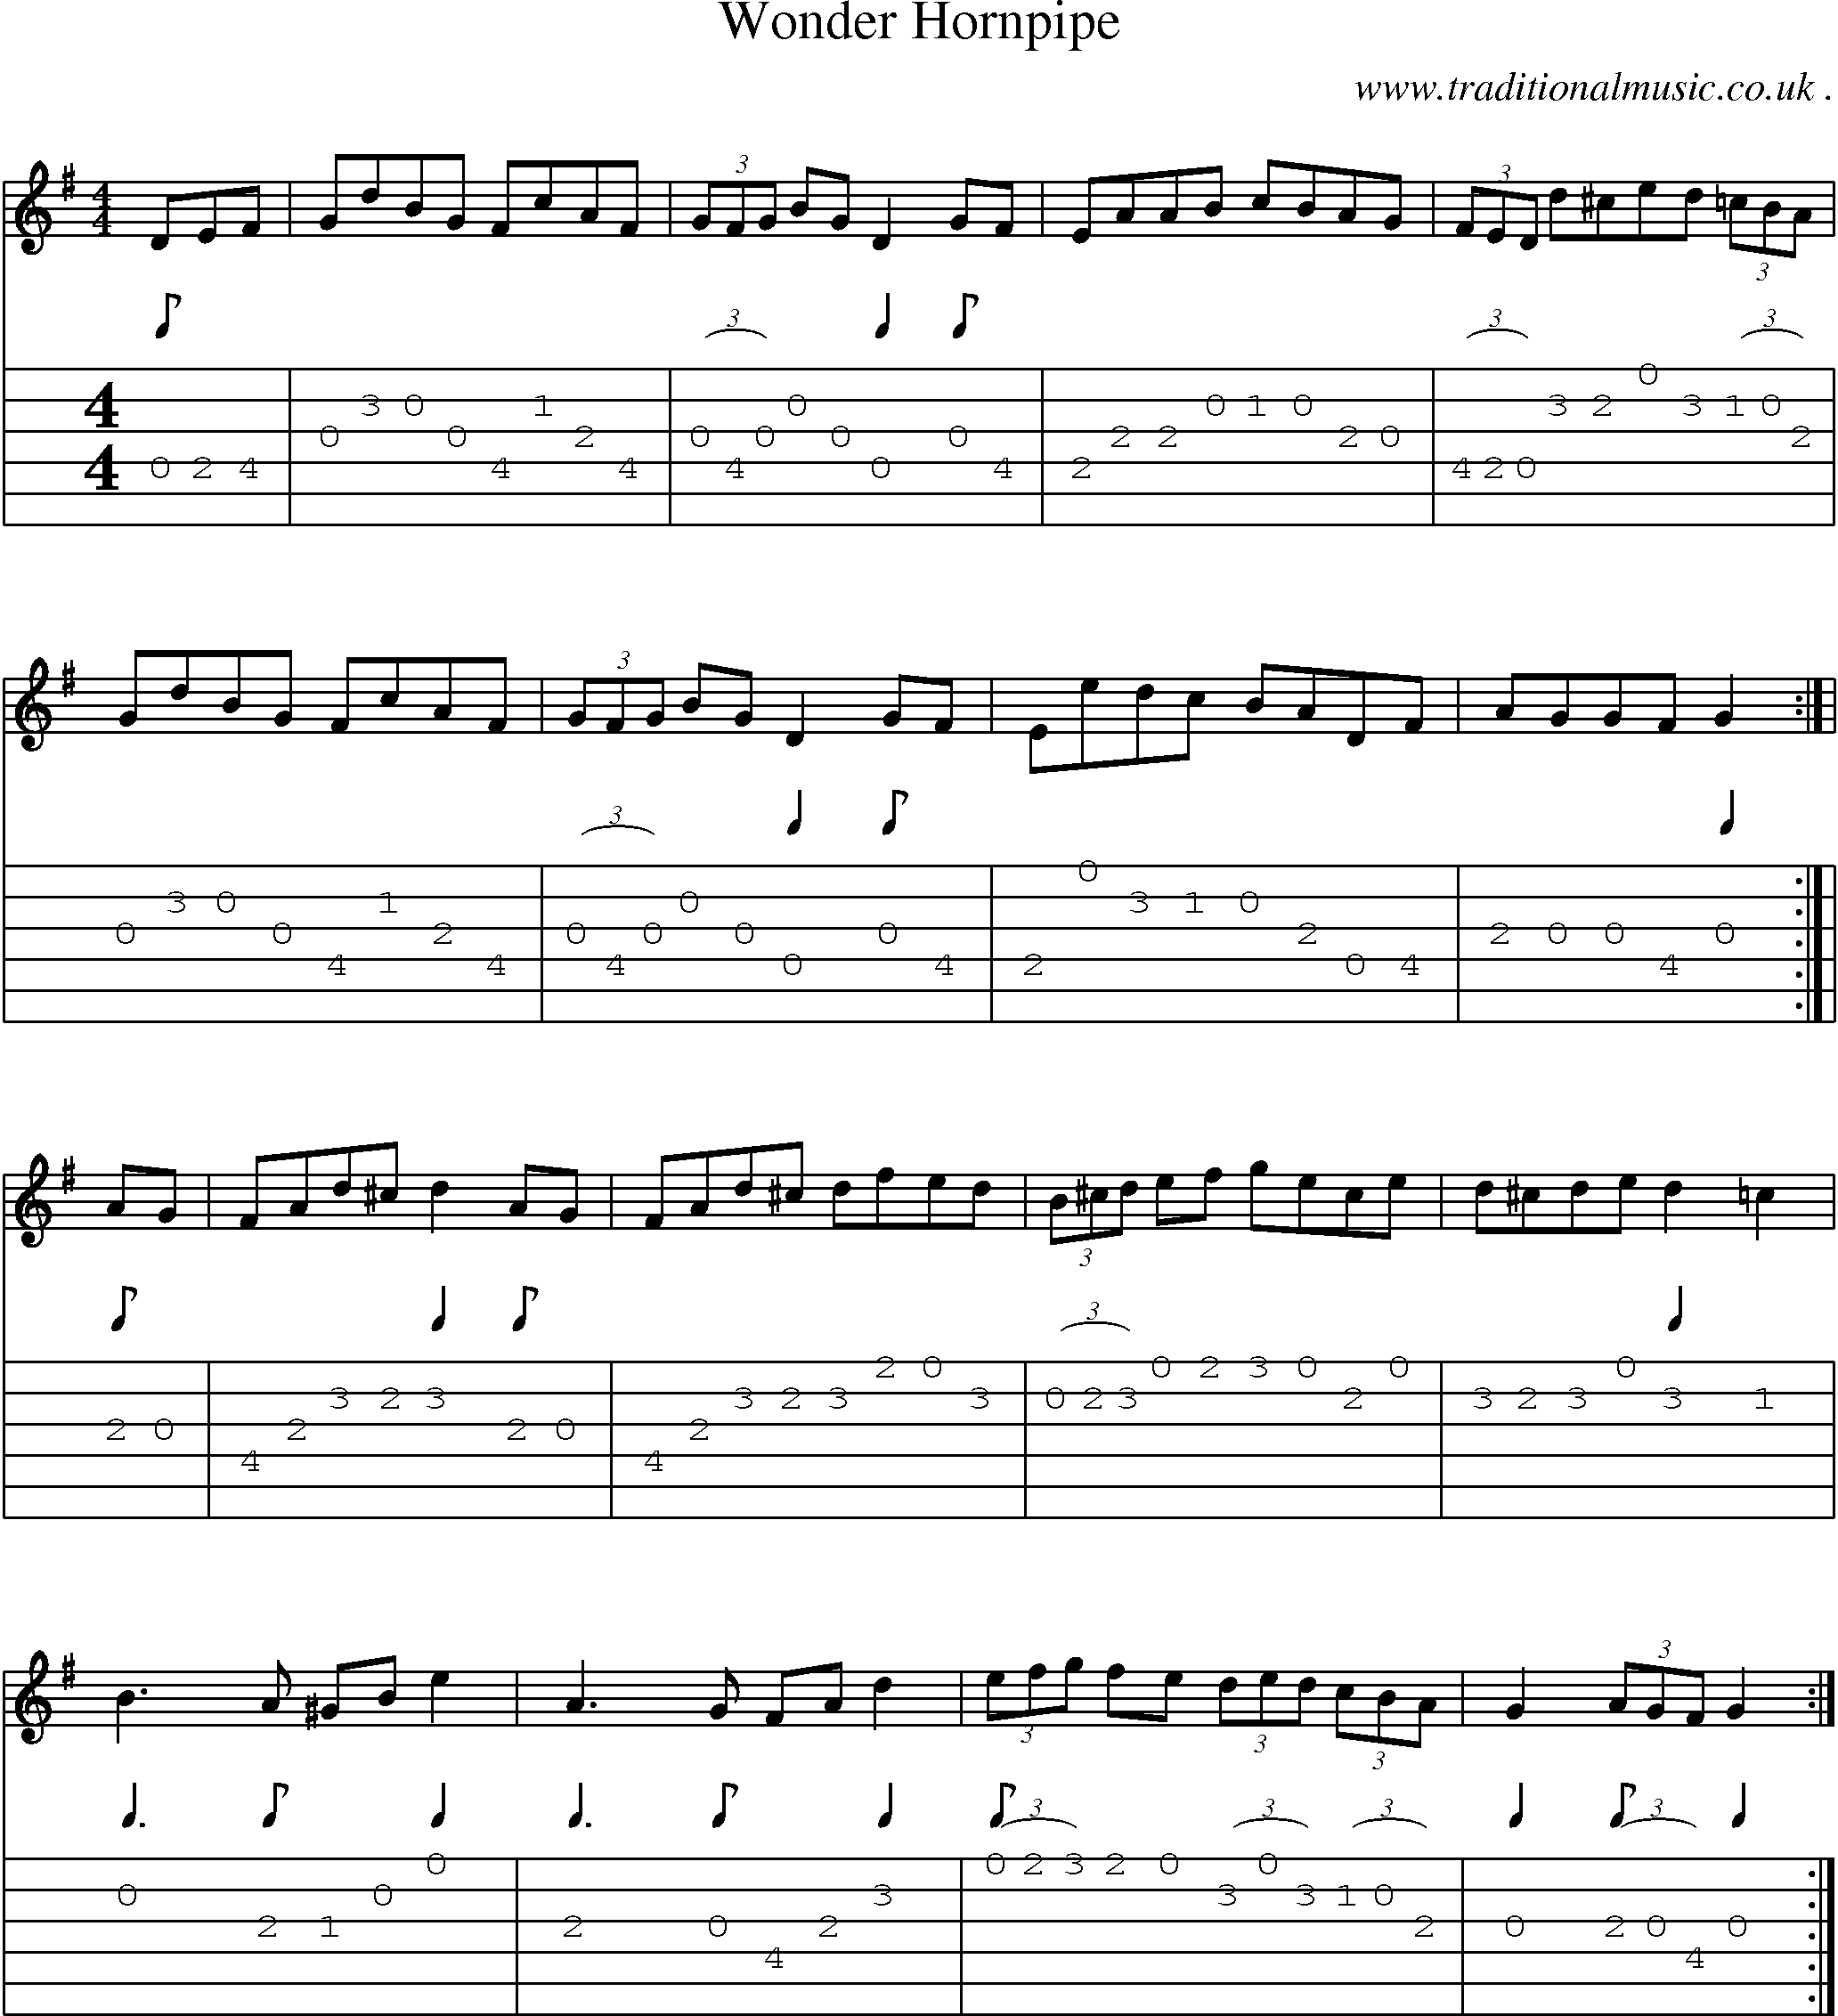 Sheet-Music and Guitar Tabs for Wonder Hornpipe